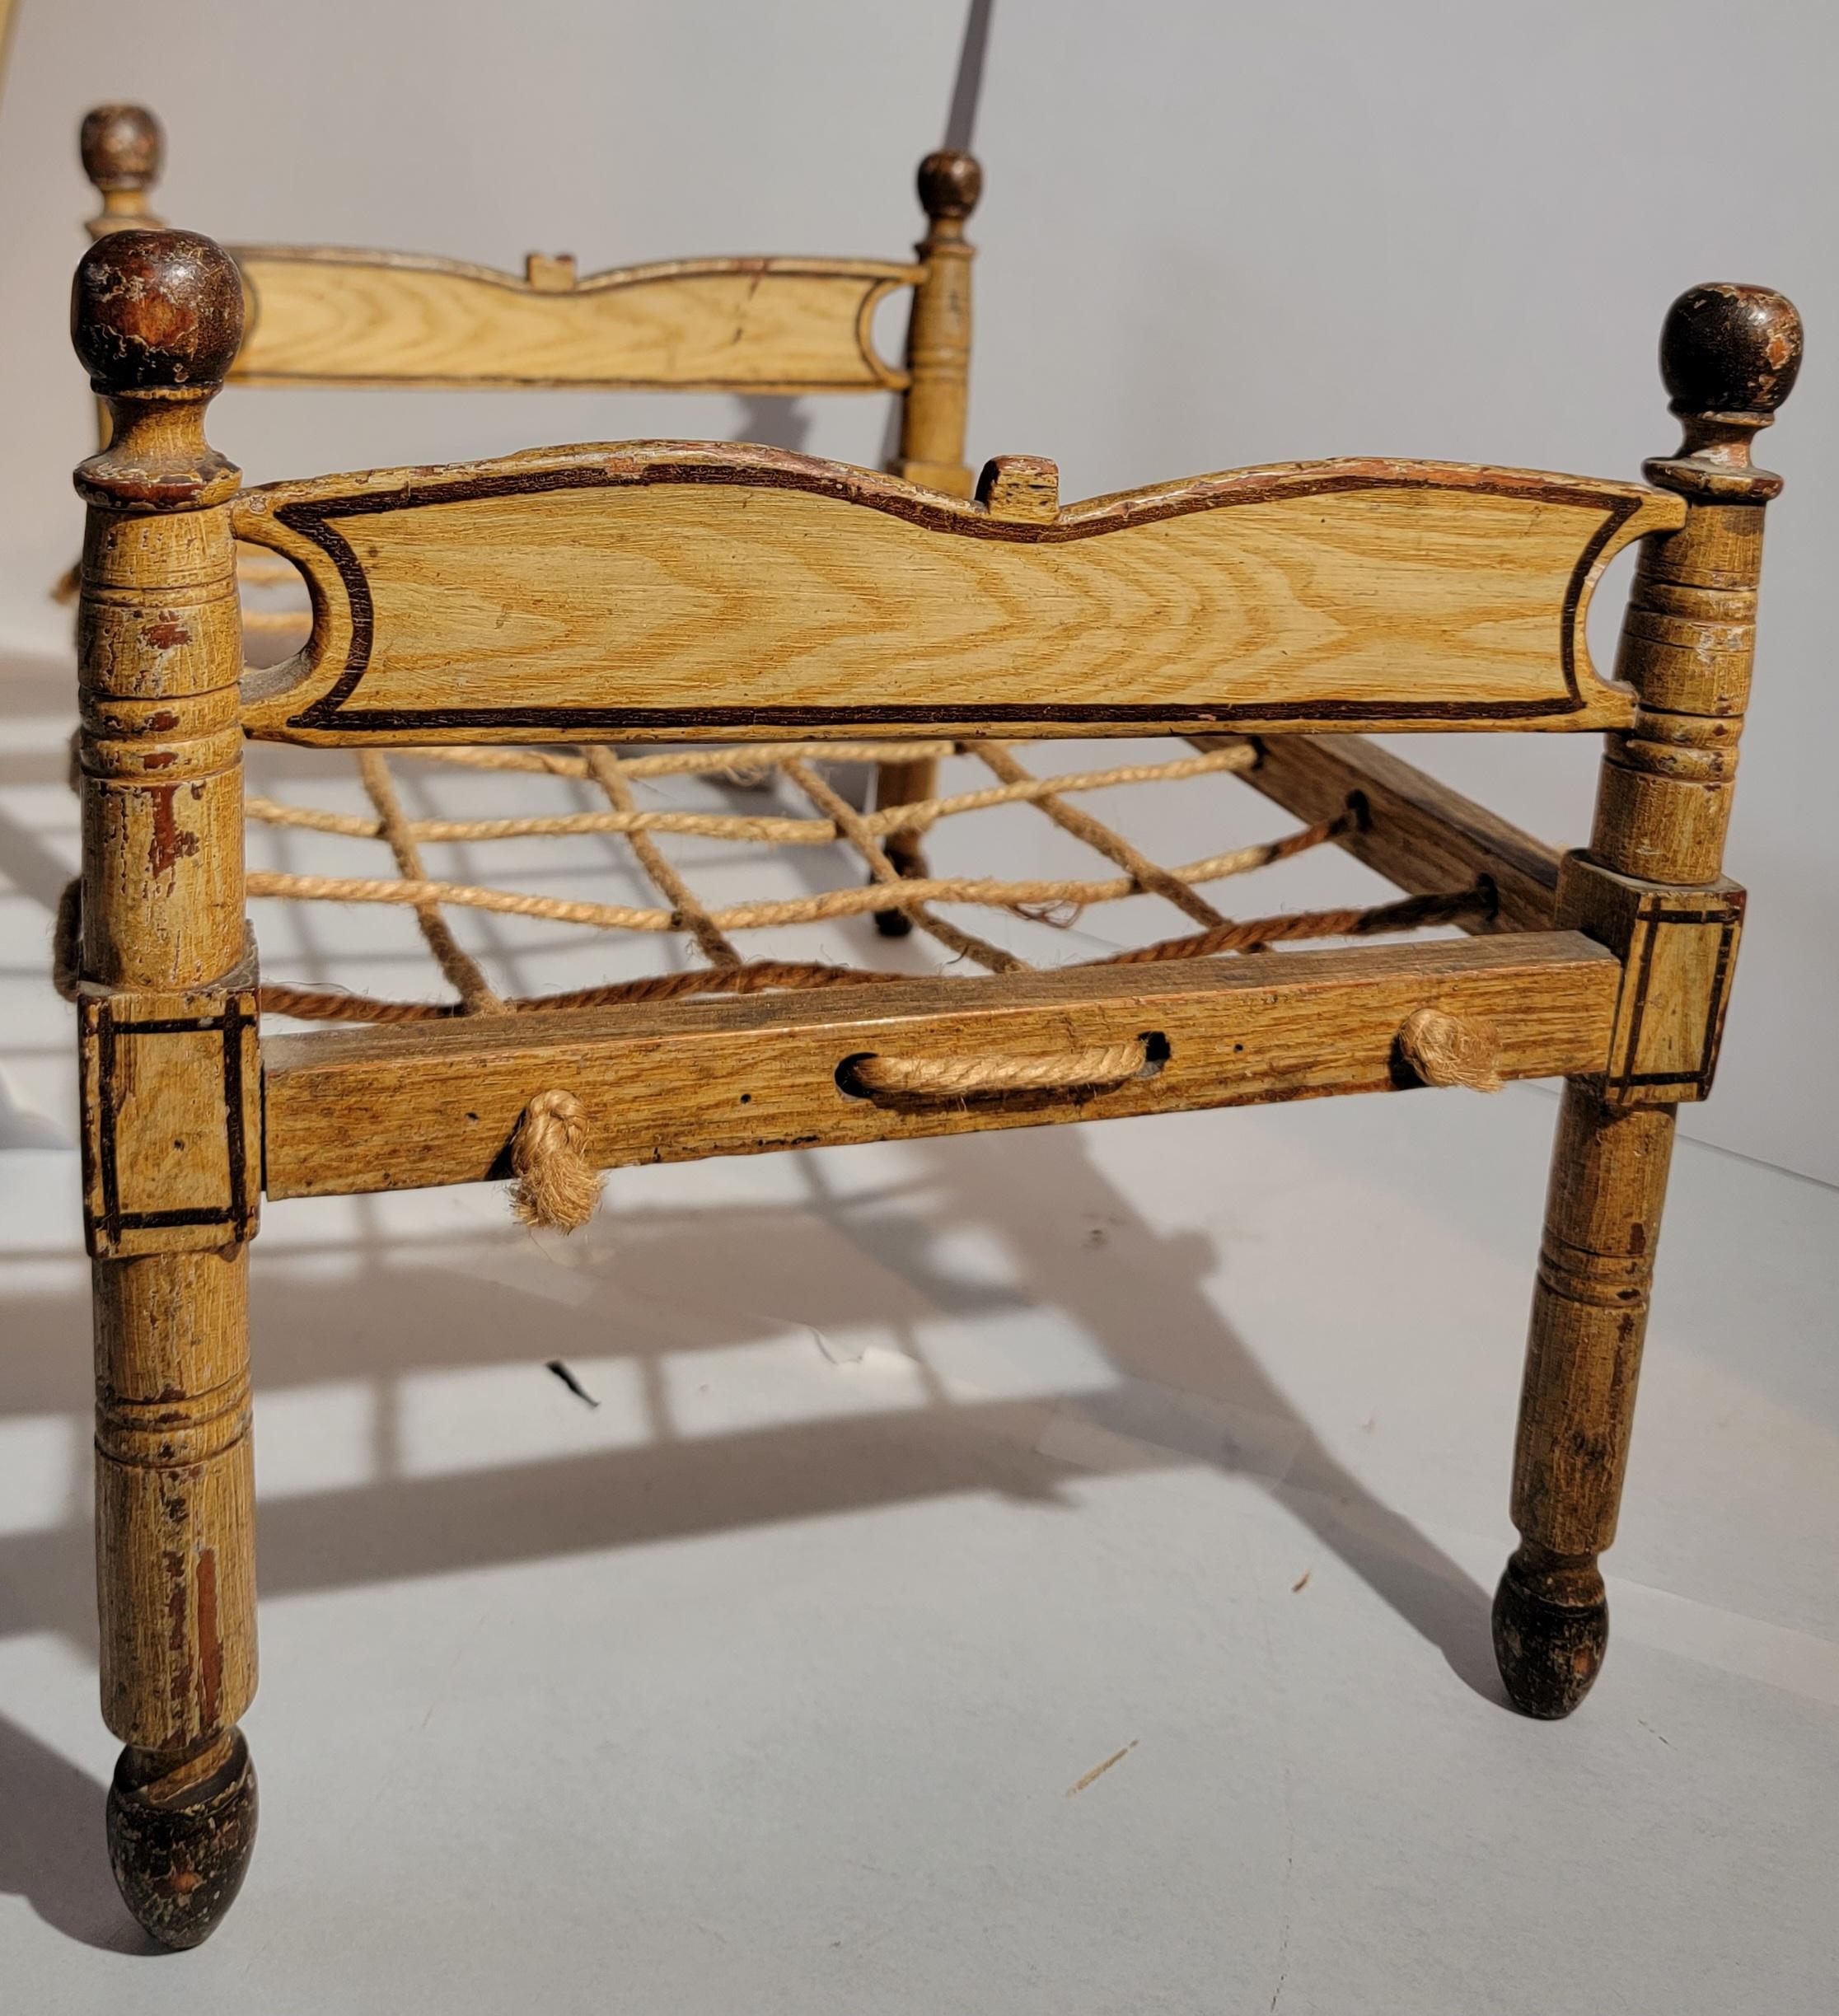 19th century Original paint decorated doll bed from Lancaster County,Pennsylvania in fine as found condition.